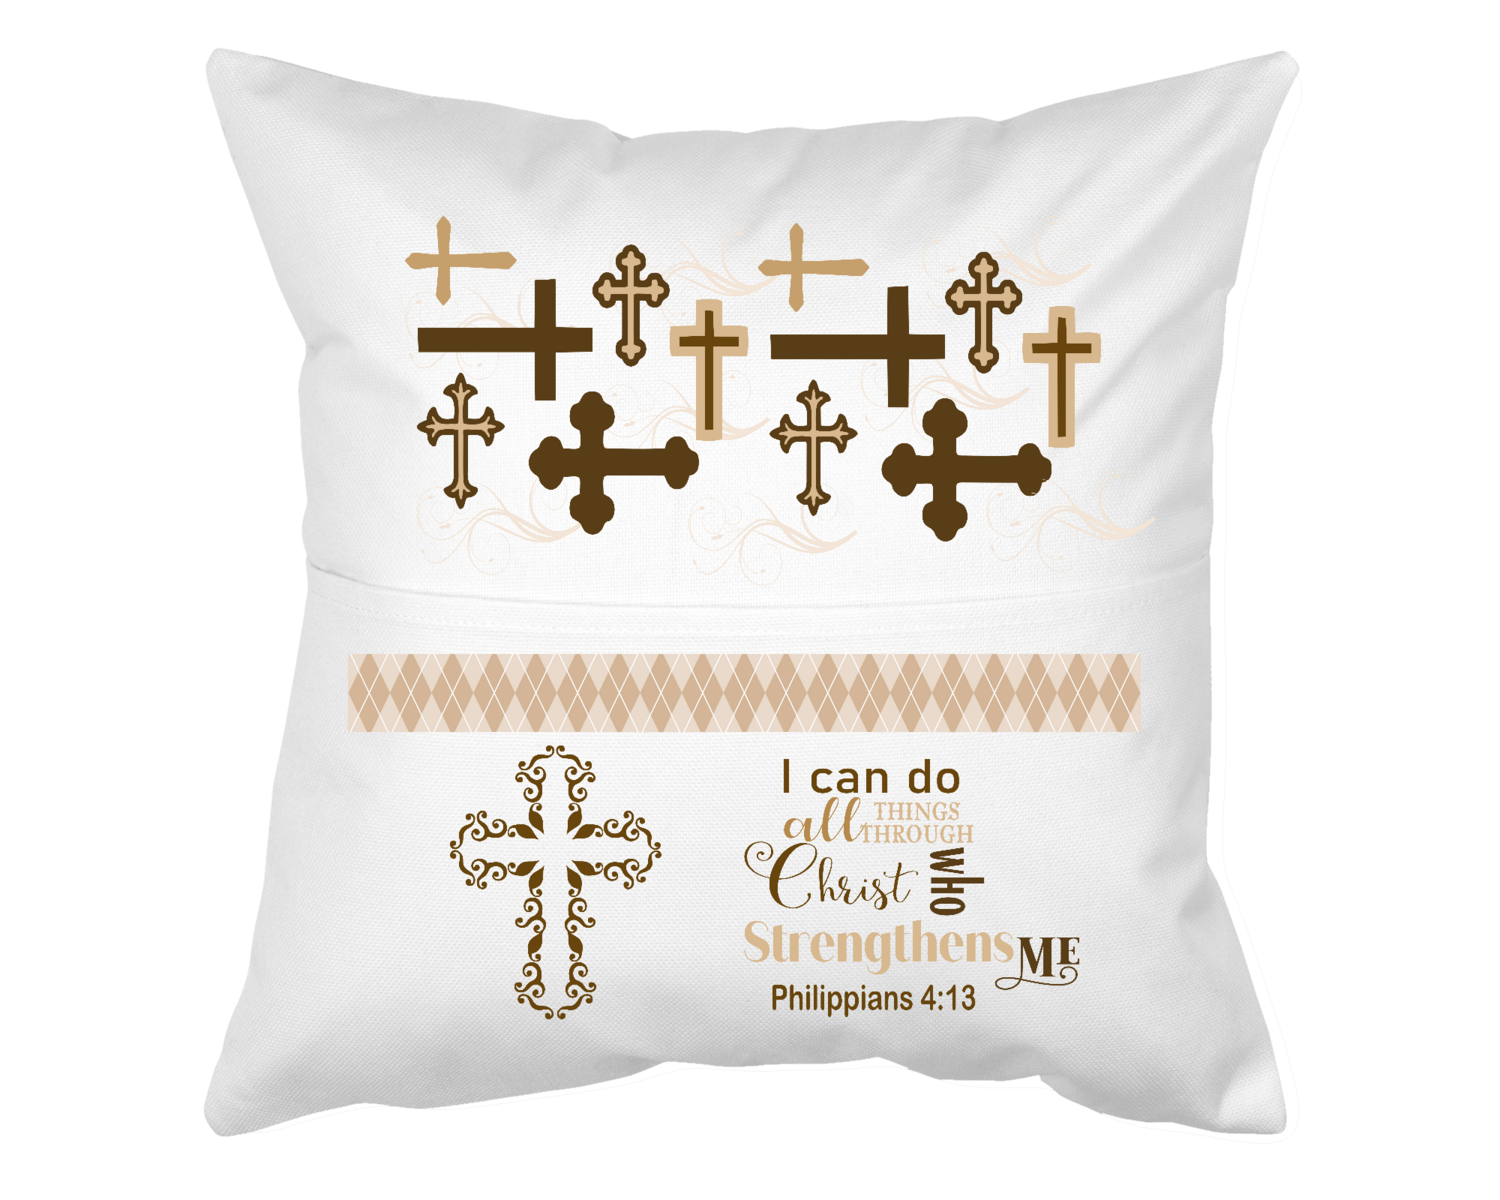 Pillow with Pocket: I CAN DO ALL THINGS THROUGH CHRIST WHO STRENGTHENS ME